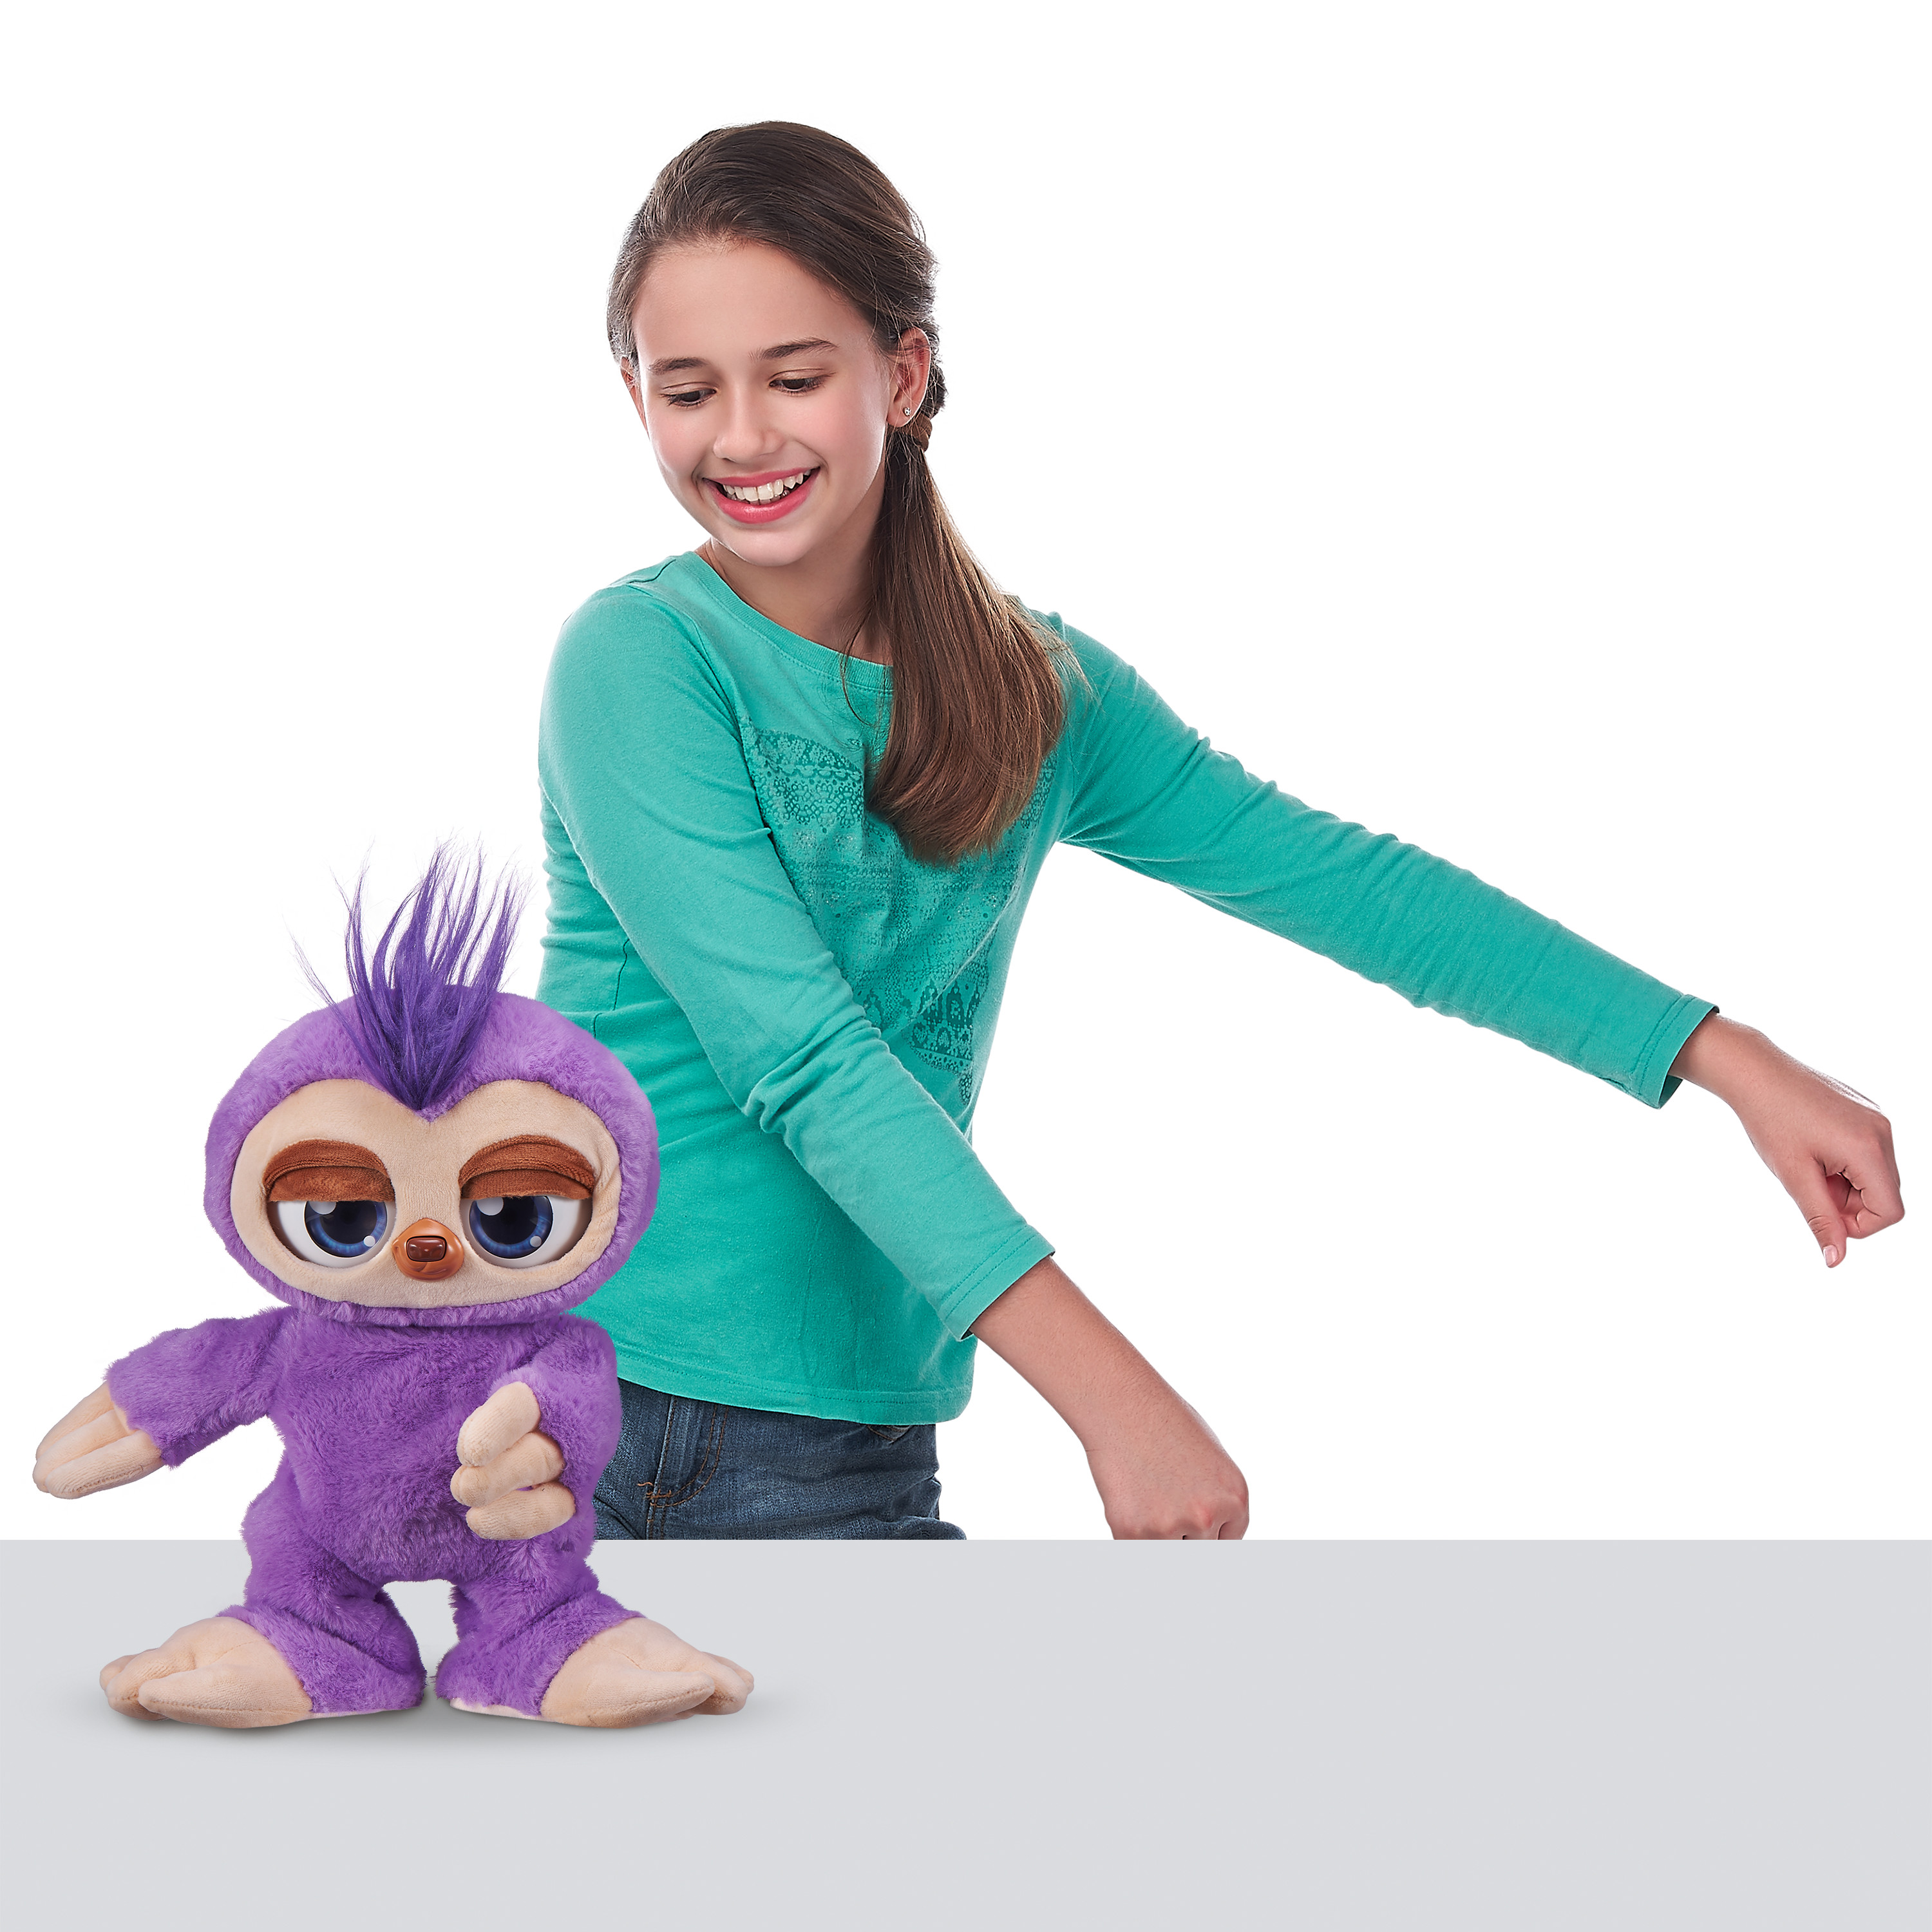 Pets Alive Fifi the Flossing Sloth Battery-Powered Robotic Toy by ZURU - image 11 of 14